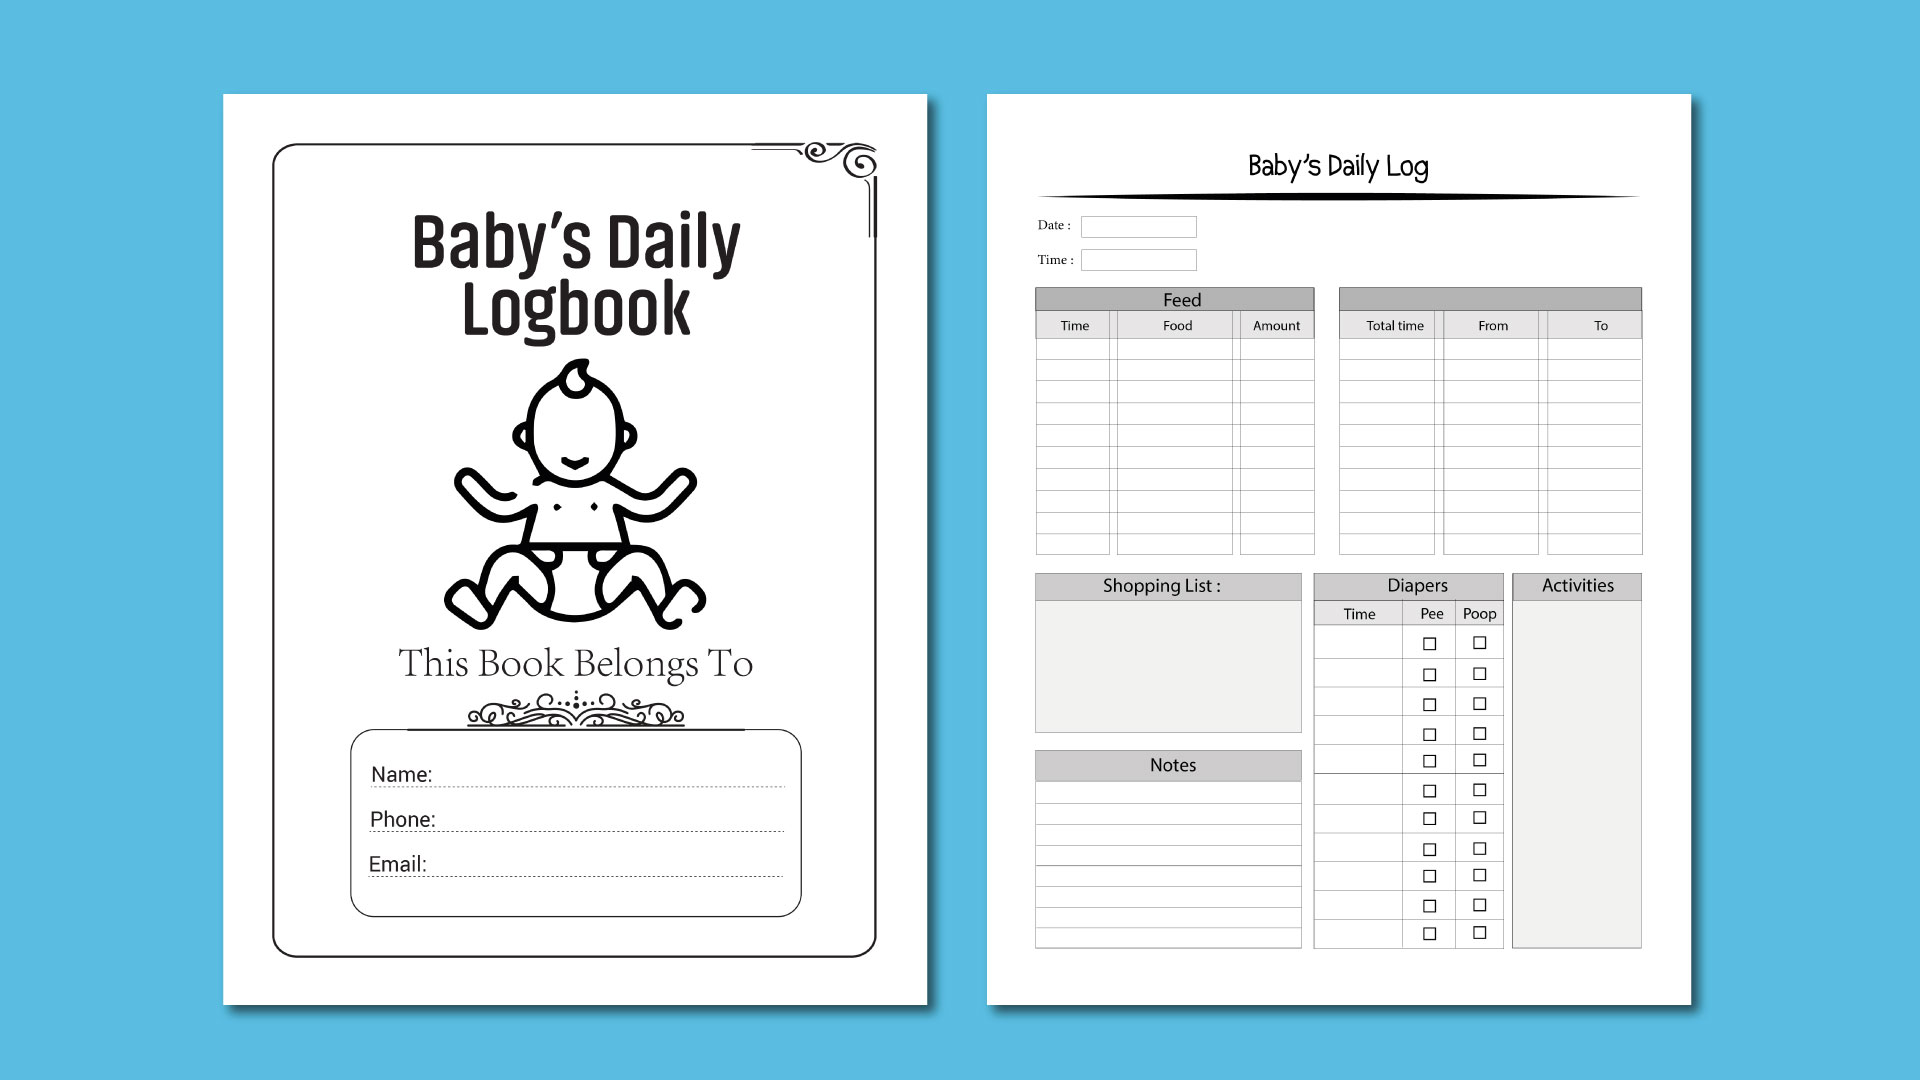 Baby's daily log book with a baby's picture on it.